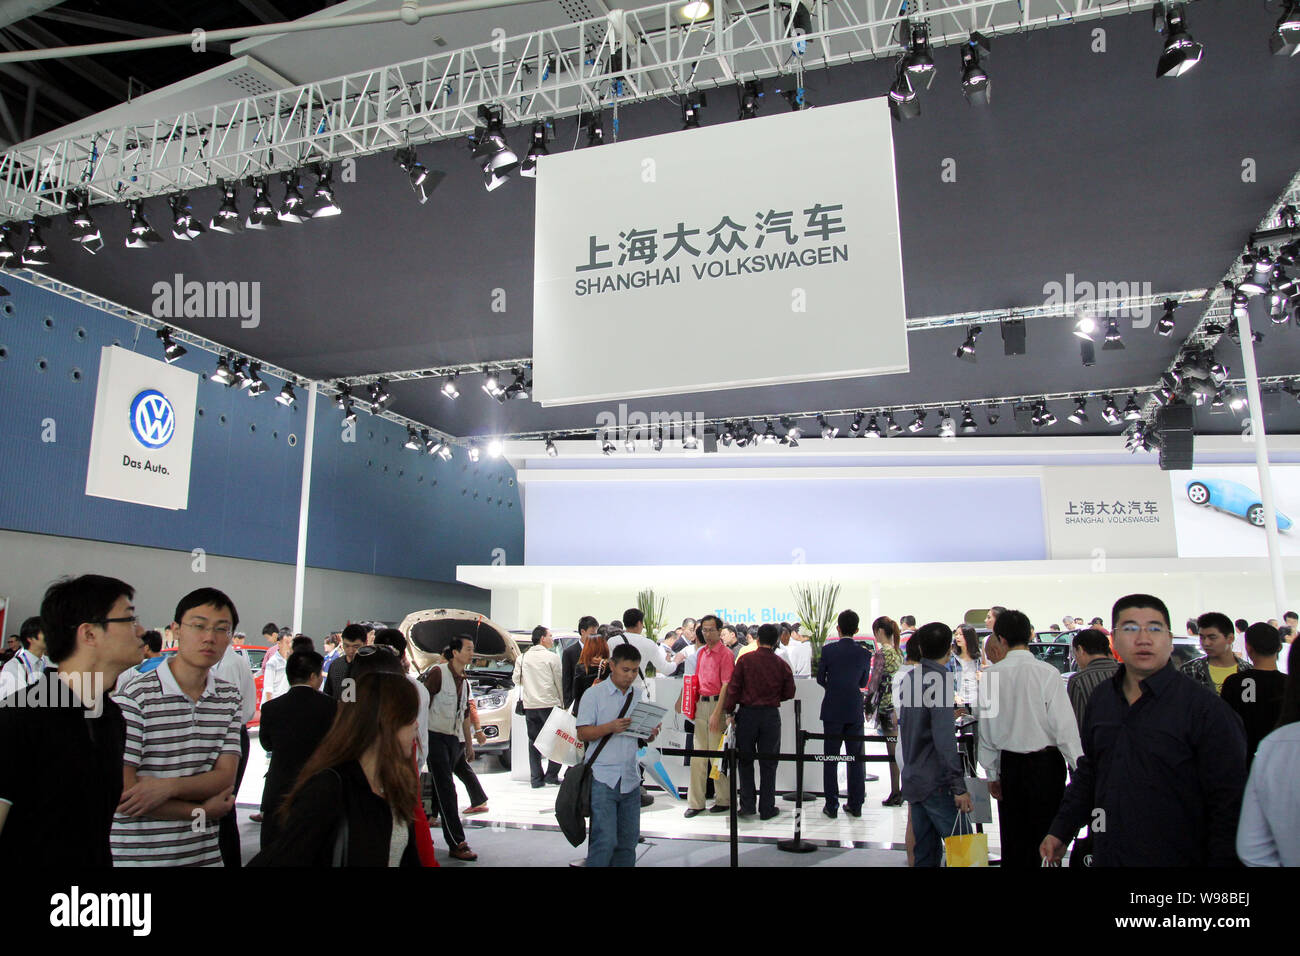 --FILE--Visitors crowd the stand of Shanghai Volkswagen, a joint venture between SAIC and VW, during the 9th China (Guangzhou) International Automobil Stock Photo